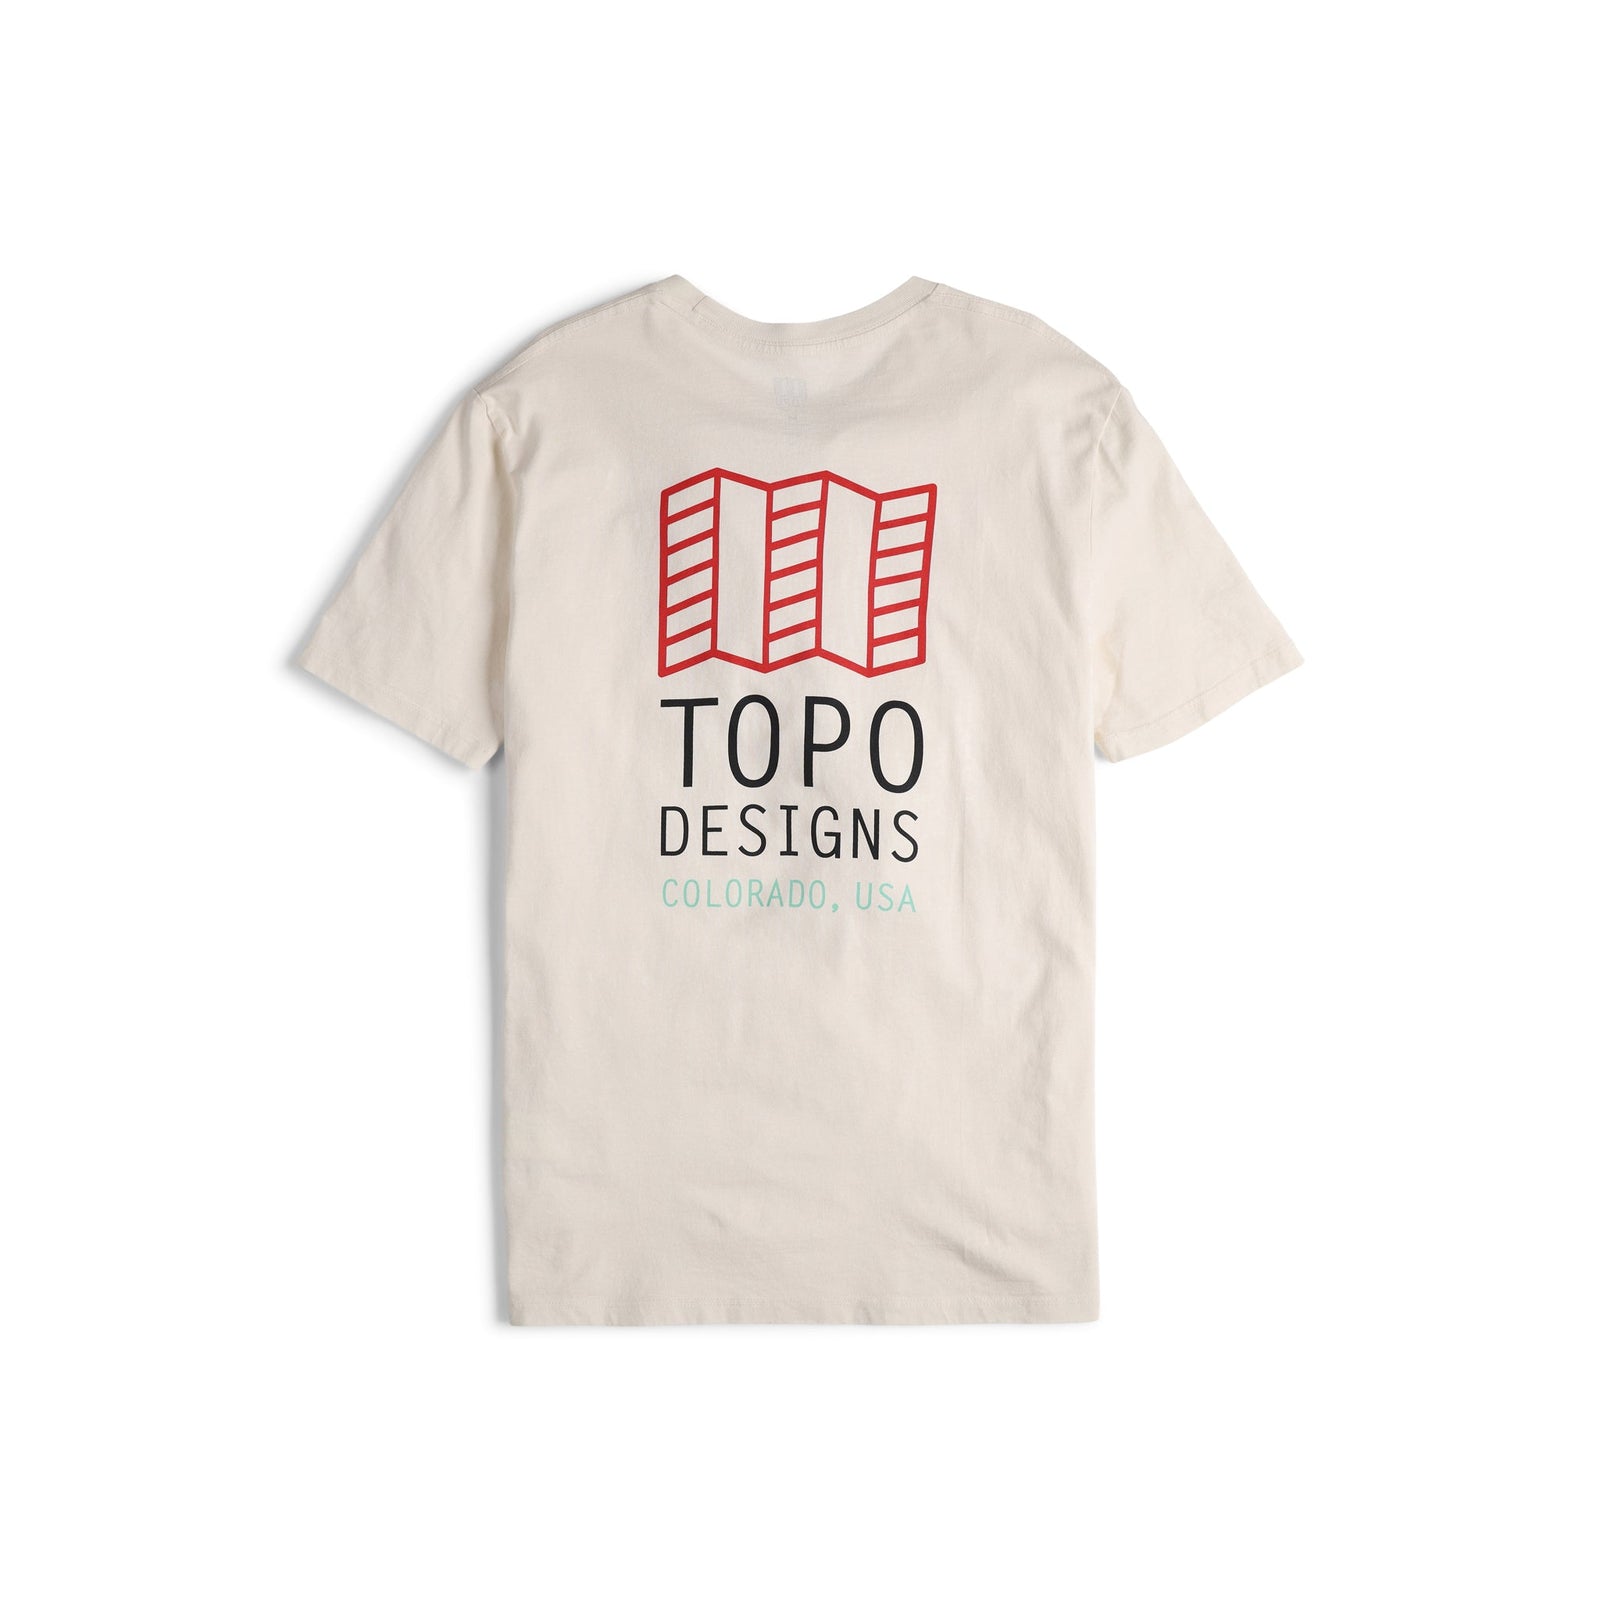 Back View of Topo Designs Men's Small Original Logo Tee 100% organic cotton short sleeve graphic logo t-shirt in "natural" white.